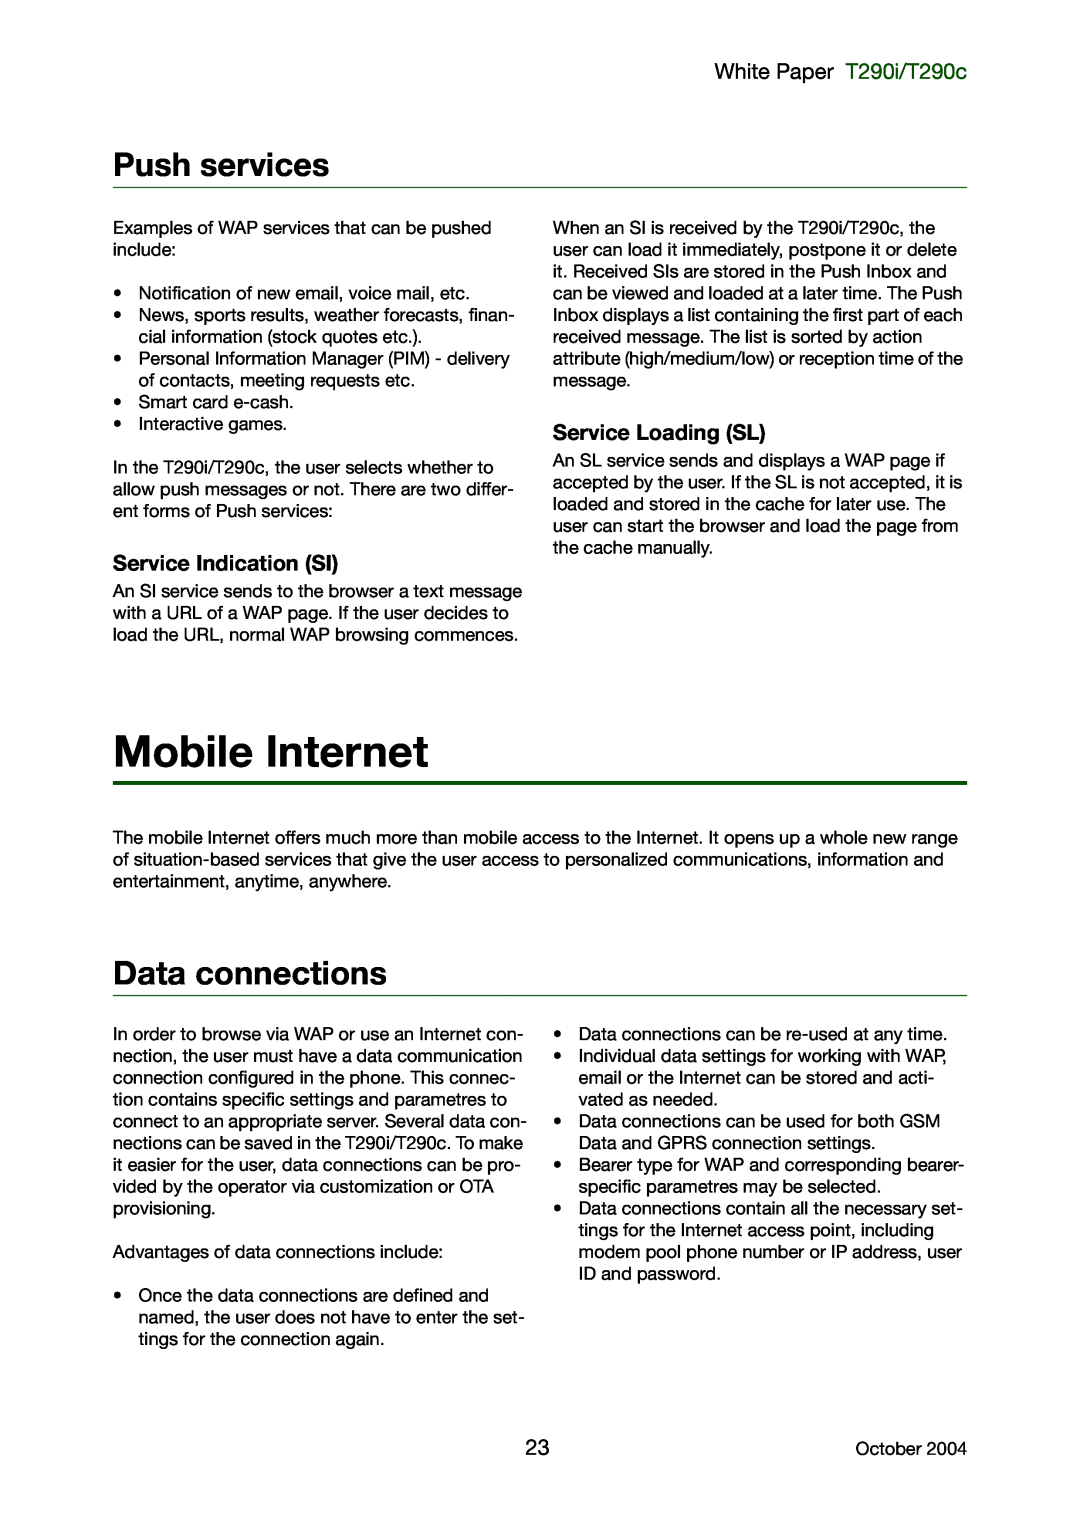 Sony Ericsson manual Mobile Internet, Push services, Data connections, White Paper T290i/T290c 